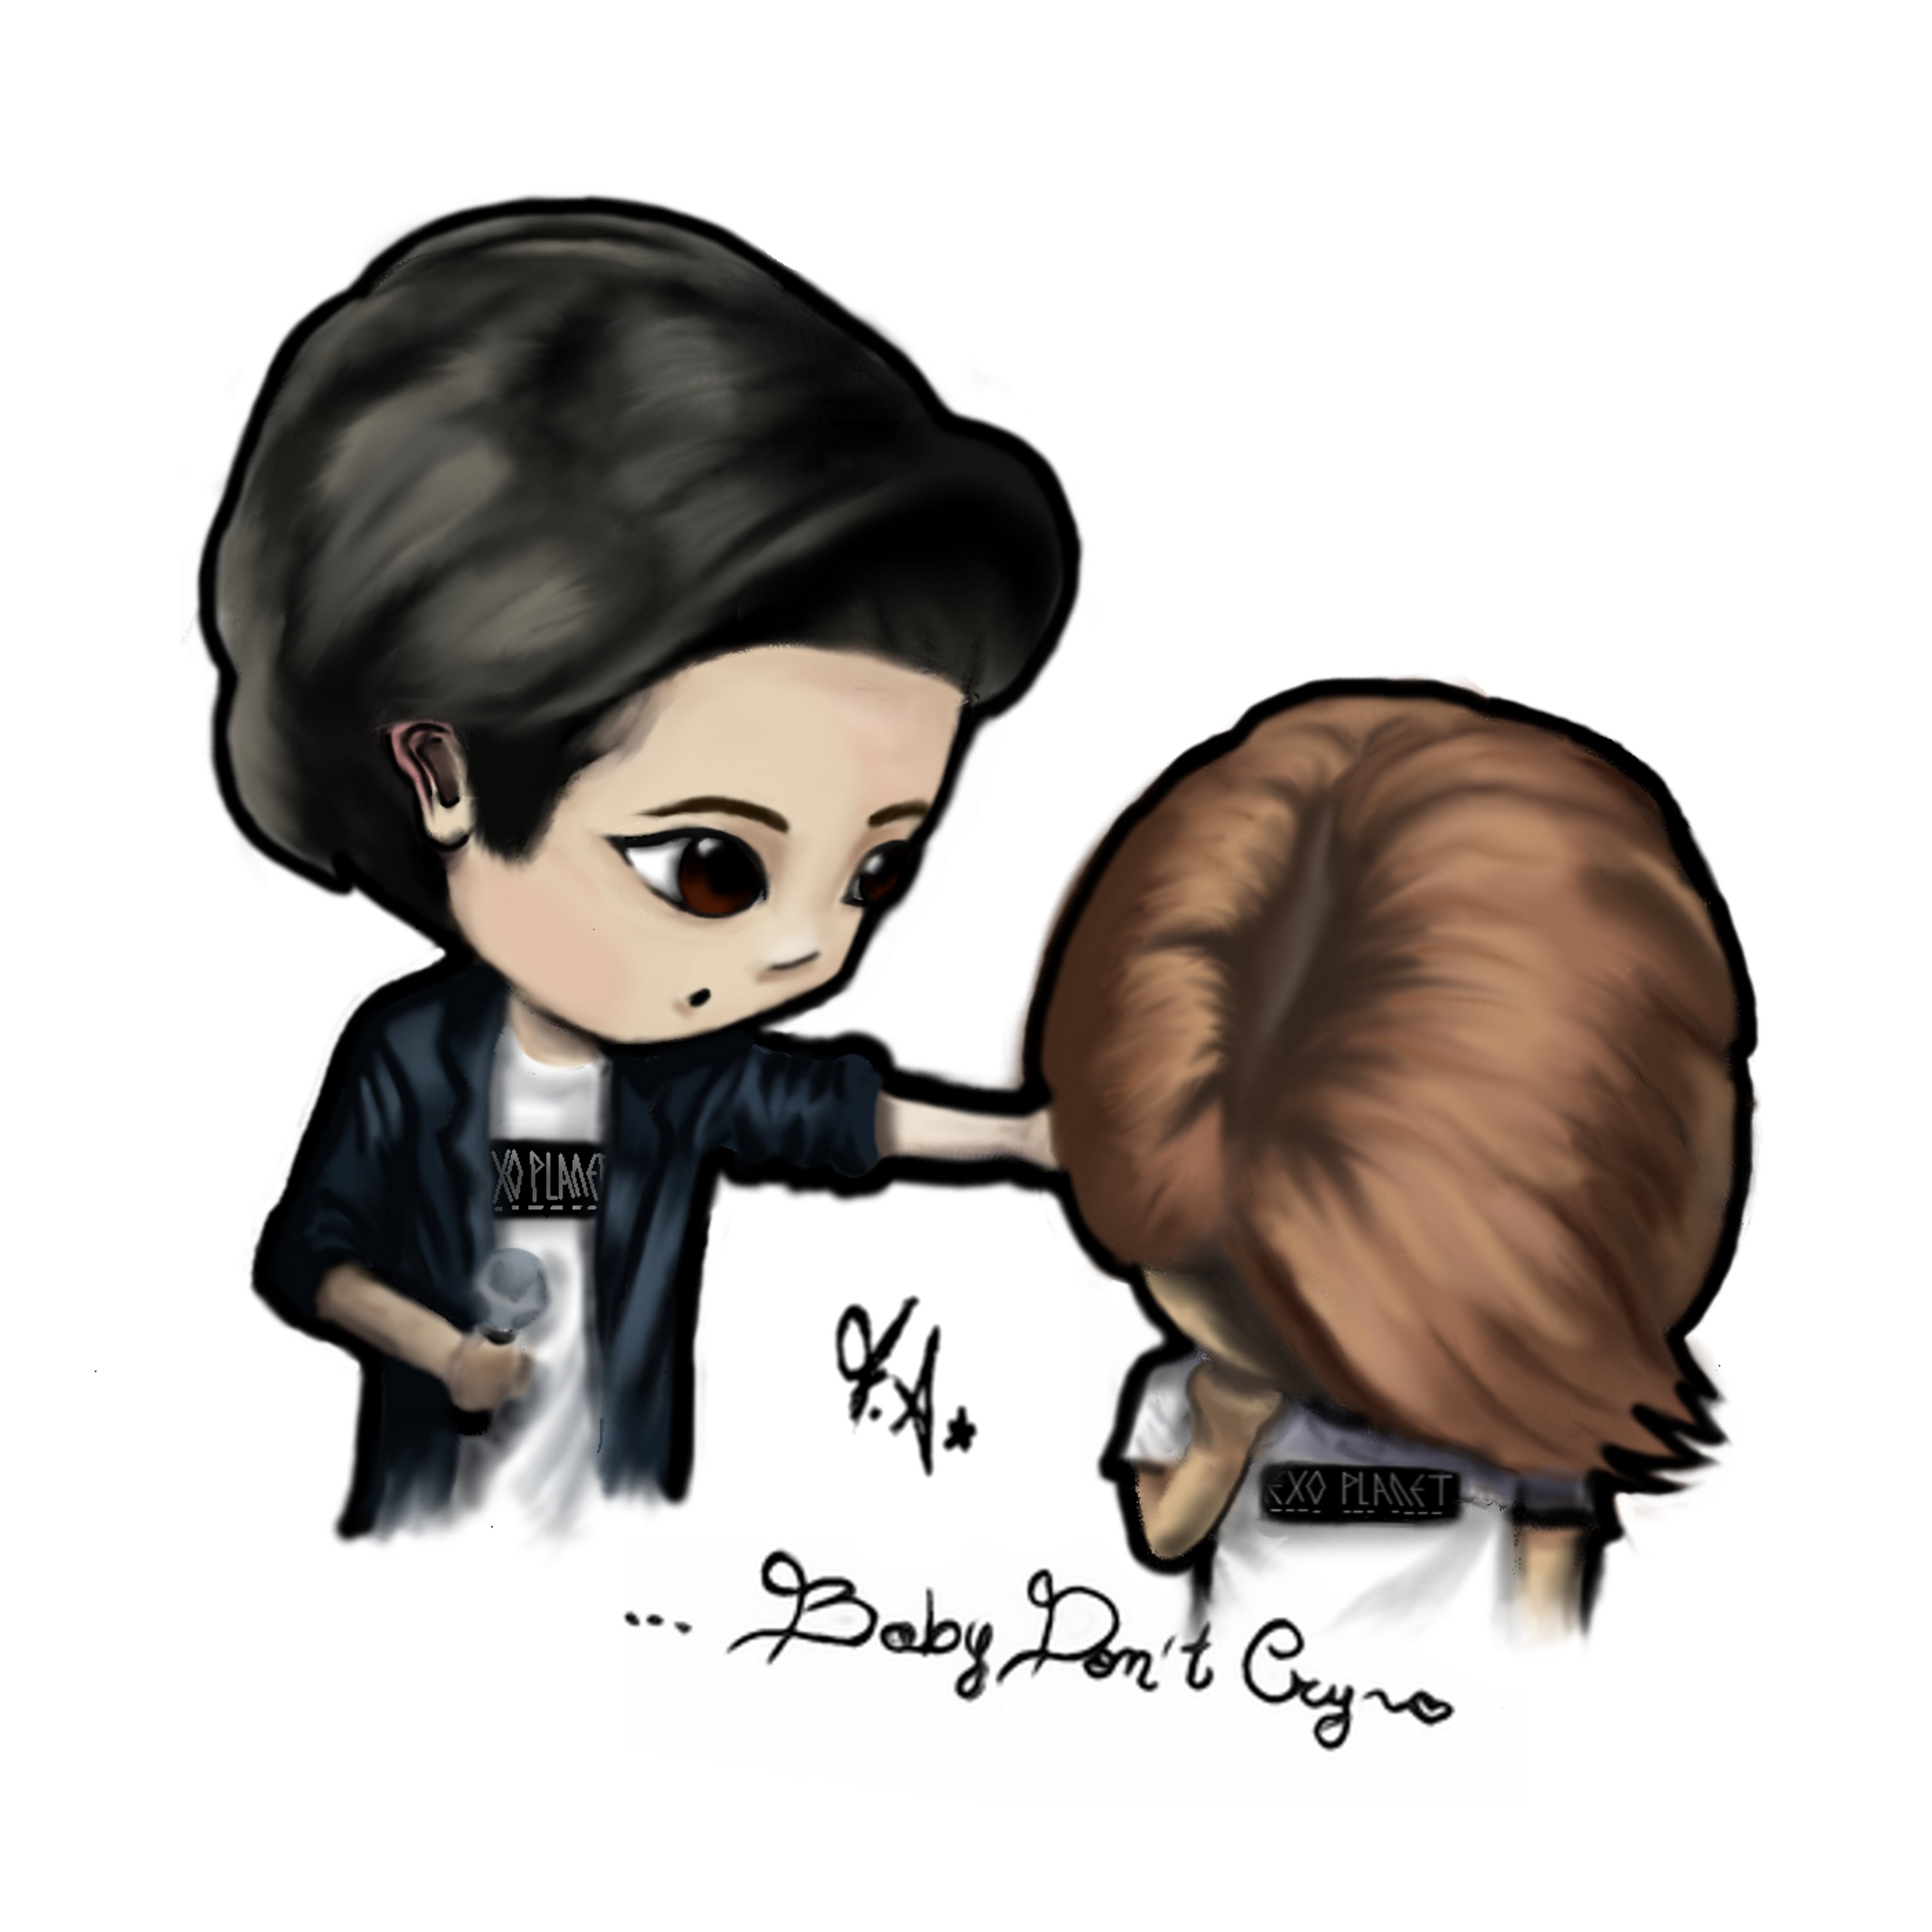 ChanBaek - Baby Don't Cry by KeepLookingHoney on DeviantArt